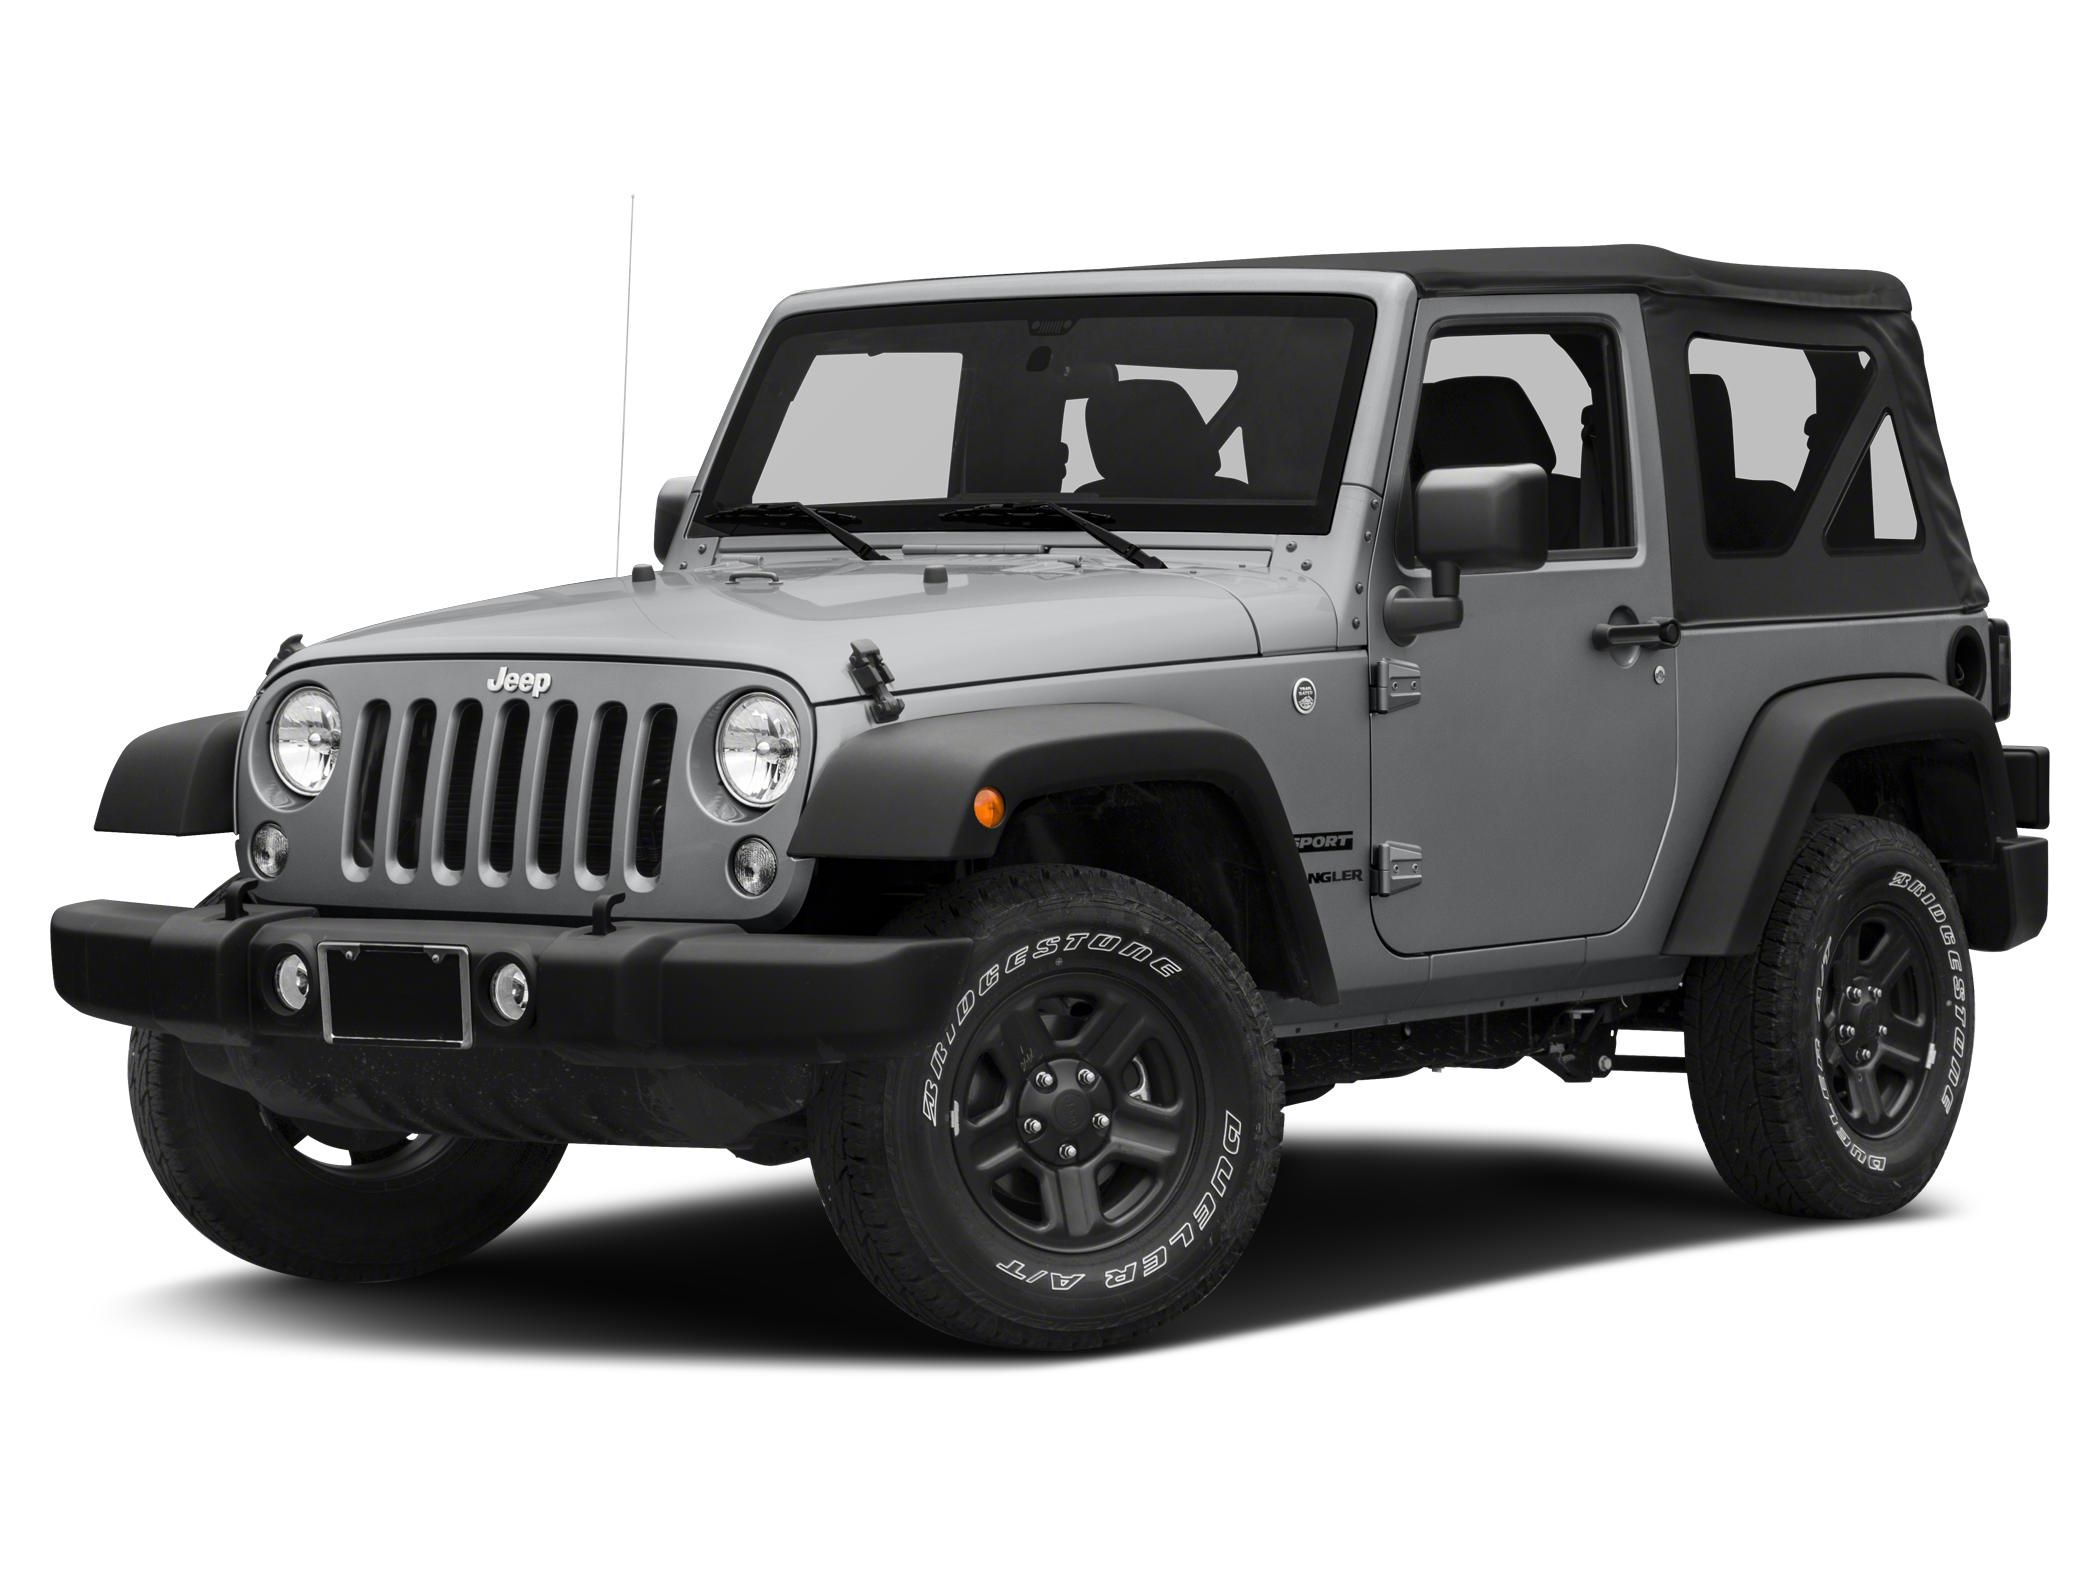 2018 Jeep Wrangler JK Unlimited Reviews, Price, MPG and More